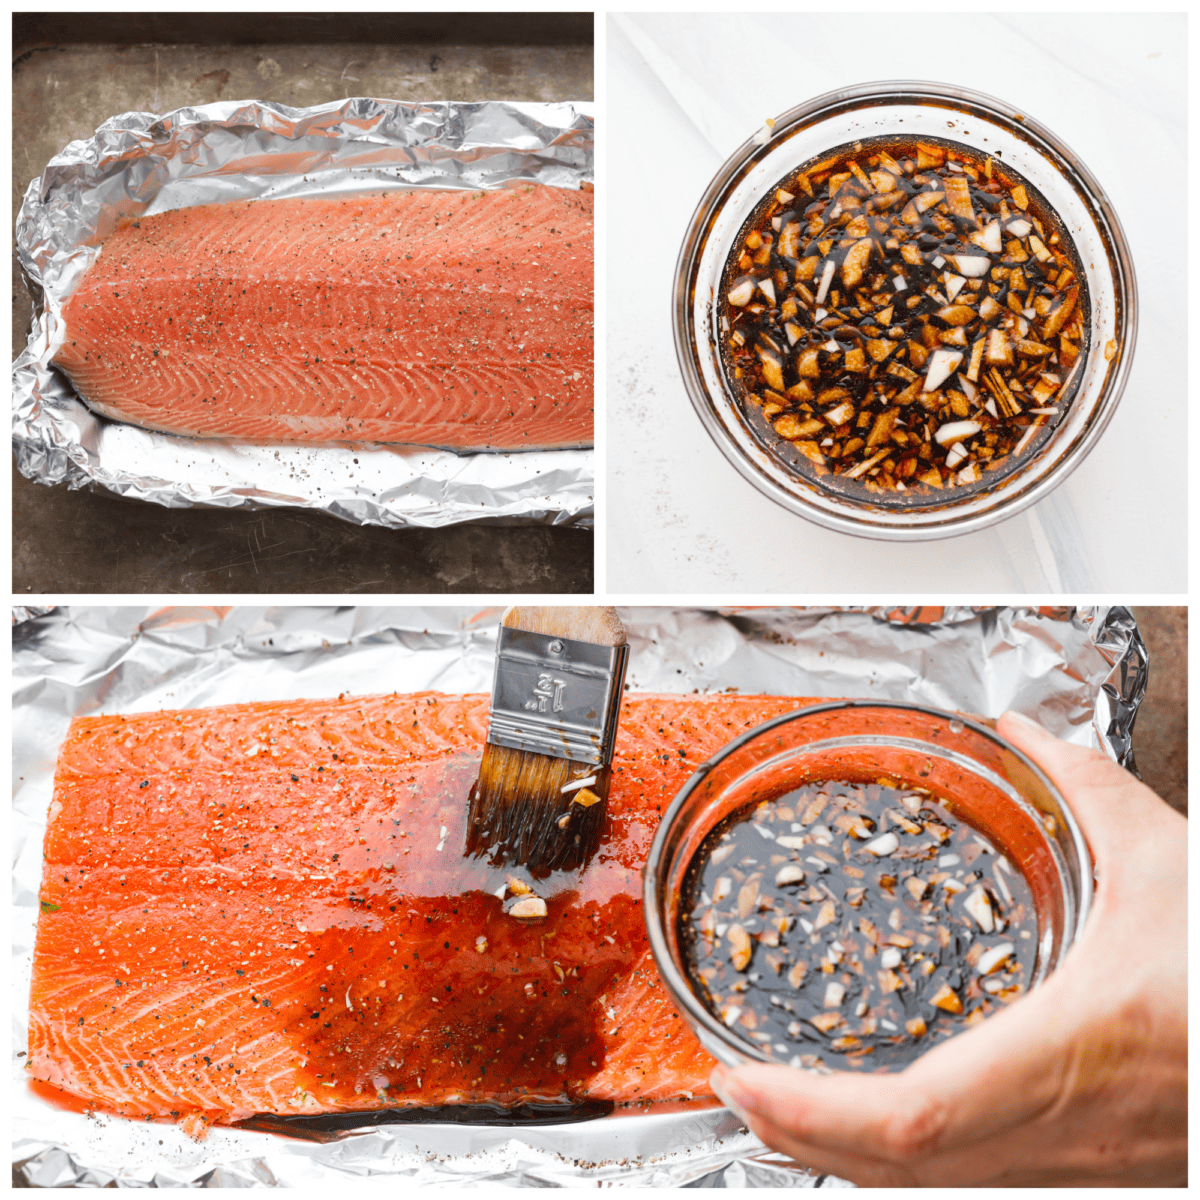 3 photos showing how to scathe the salmon with the garlic brown sugar glaze. 